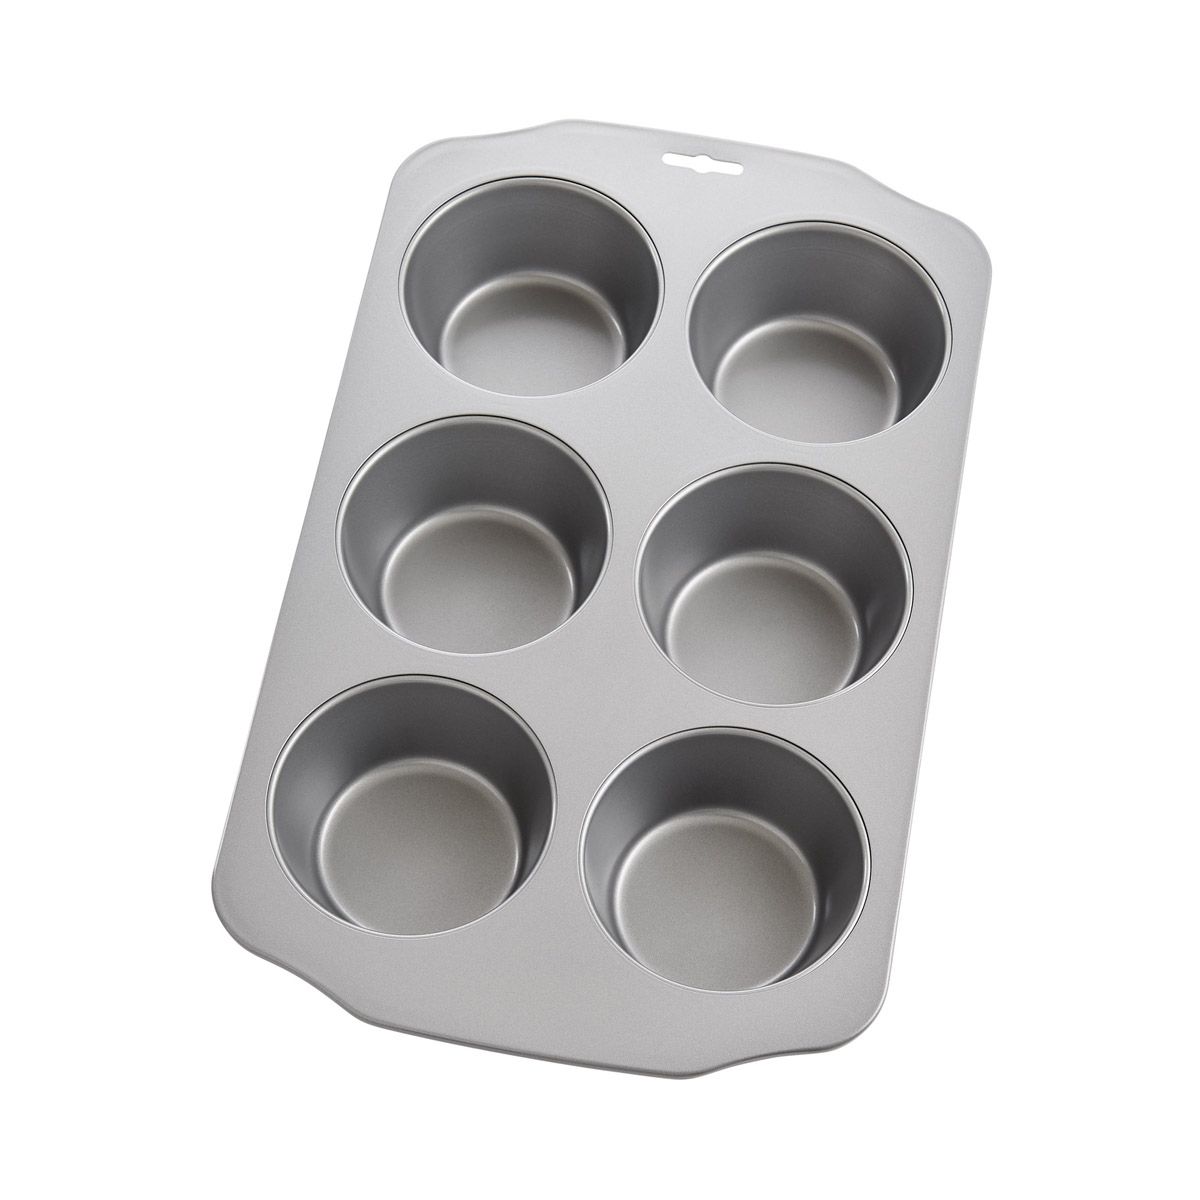 Mrs. Anderson’s Baking 24c Silicone Muffin Pan